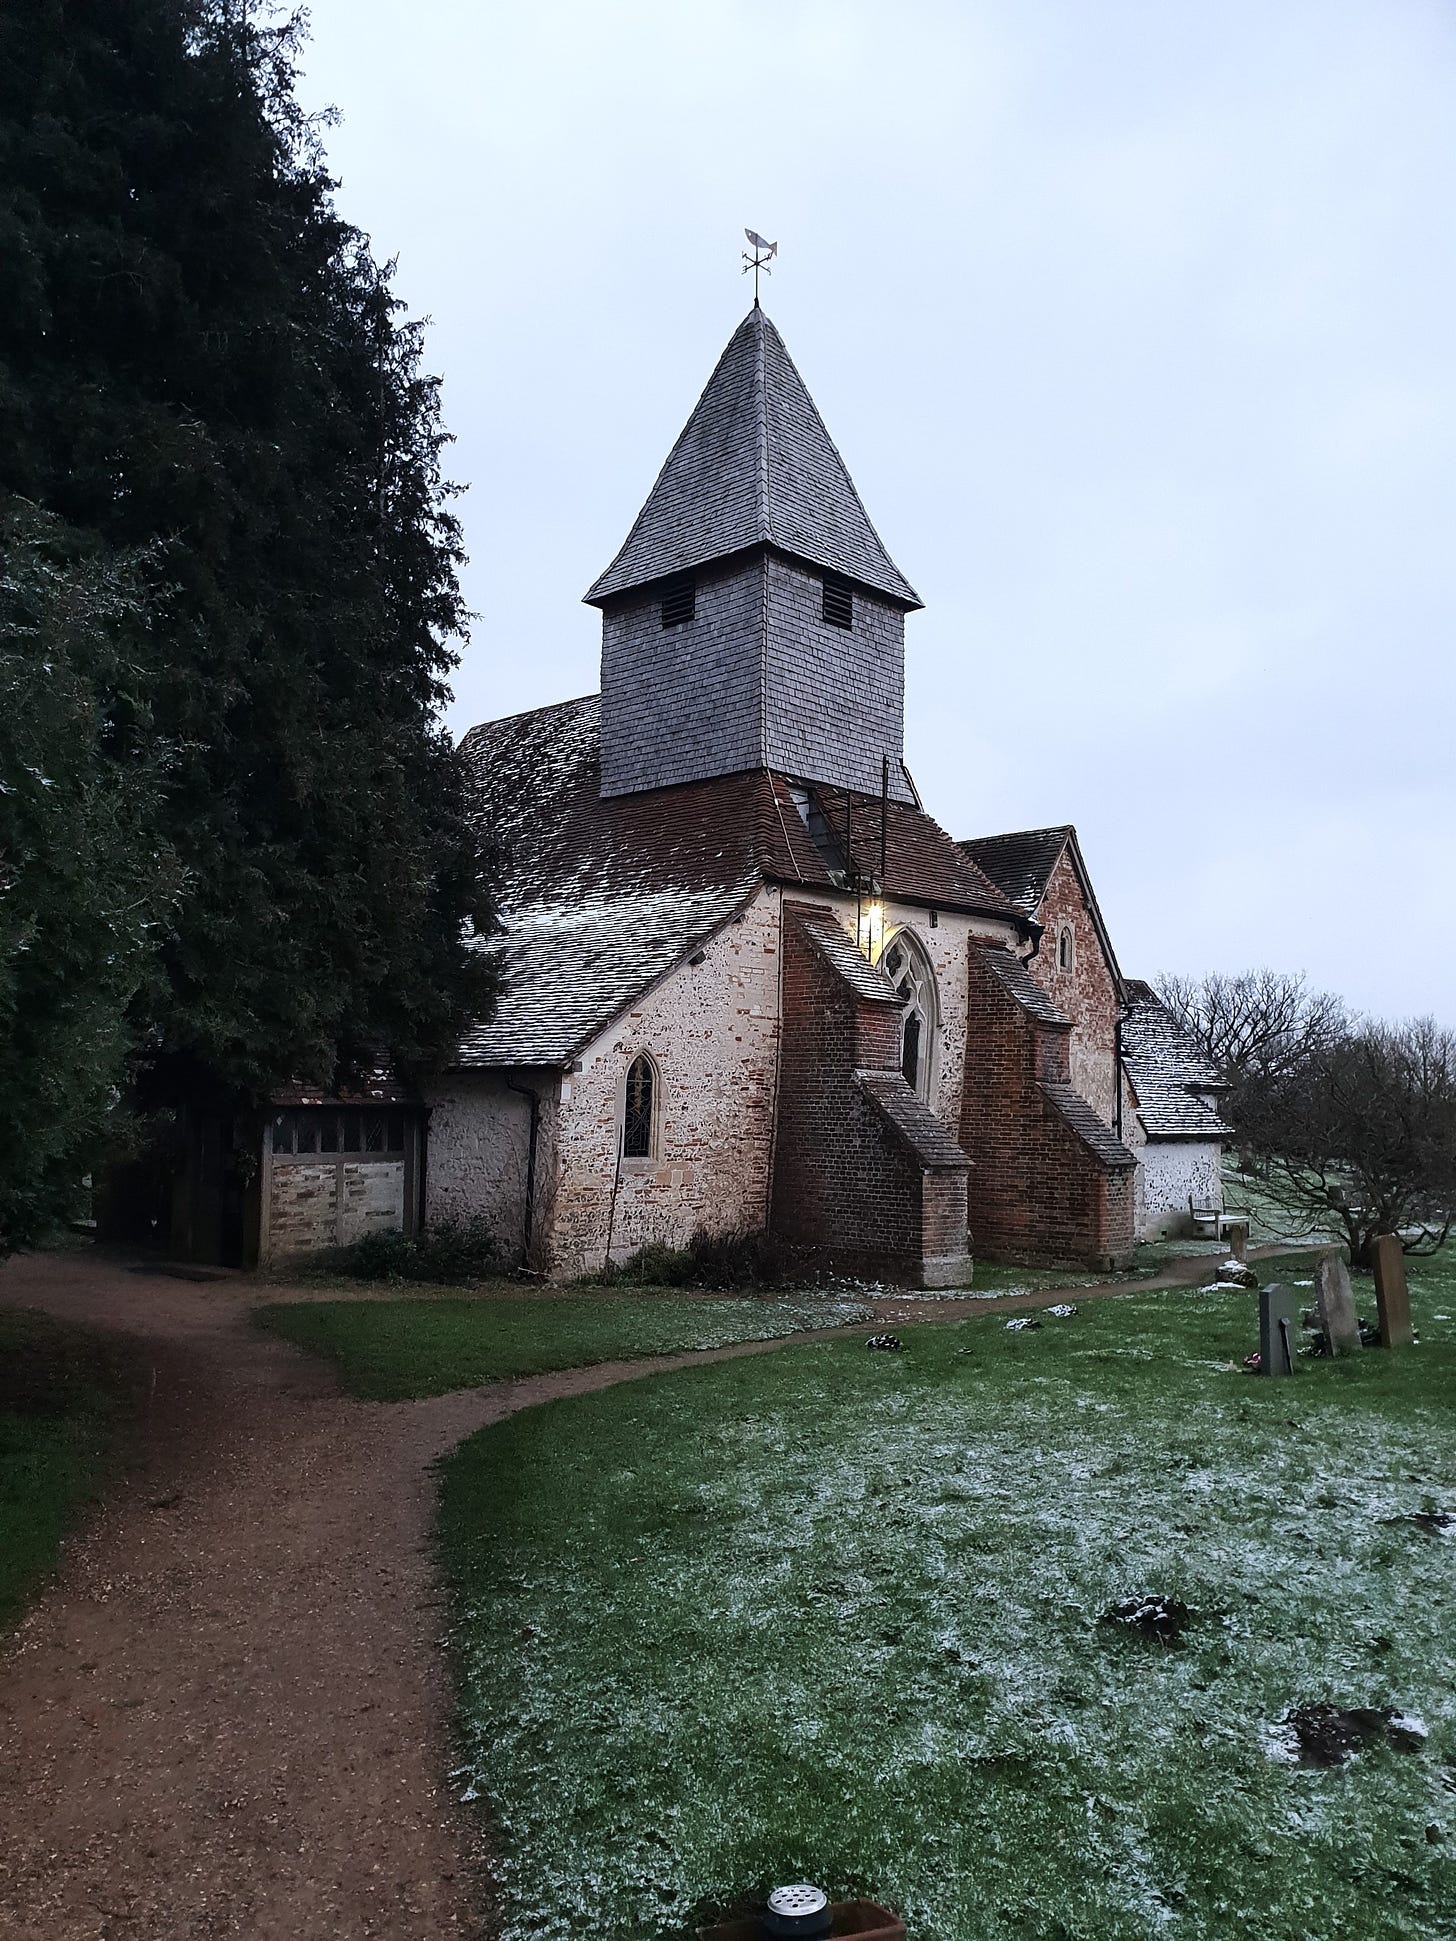 An English country church with a dusting of snow of the rooftop